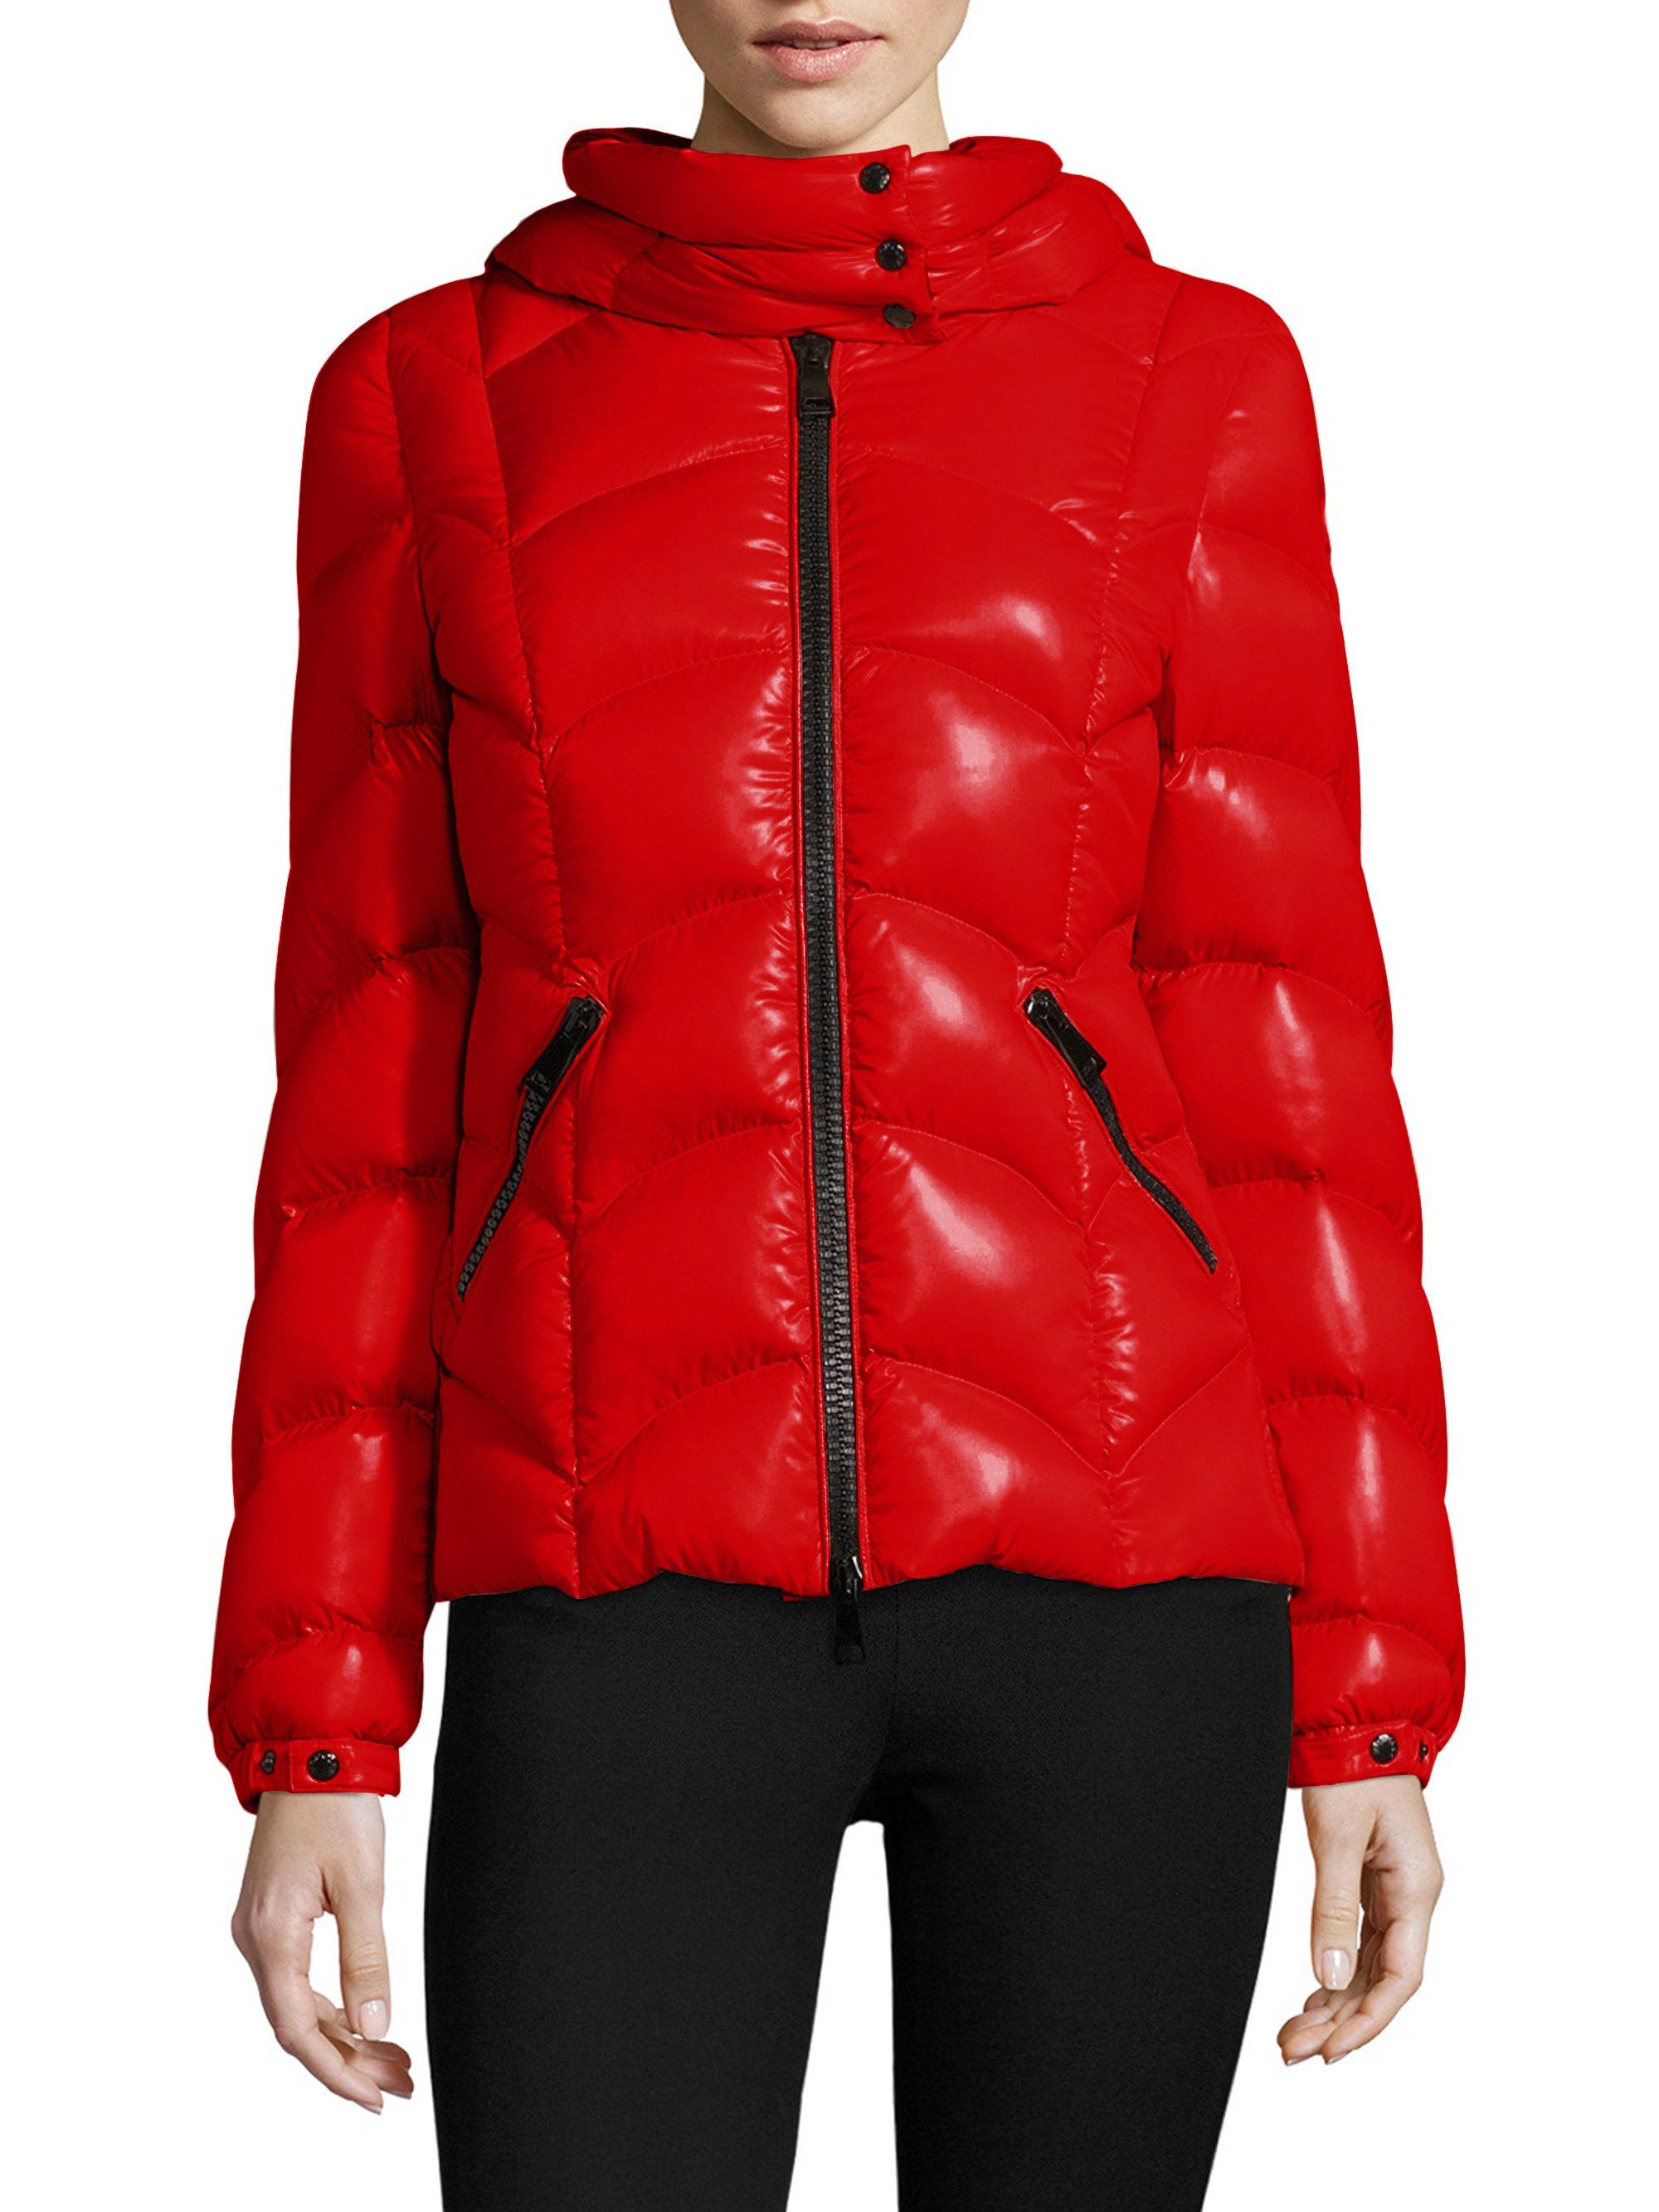 Lyst - Moncler Akebia Puffer Jacket in Red